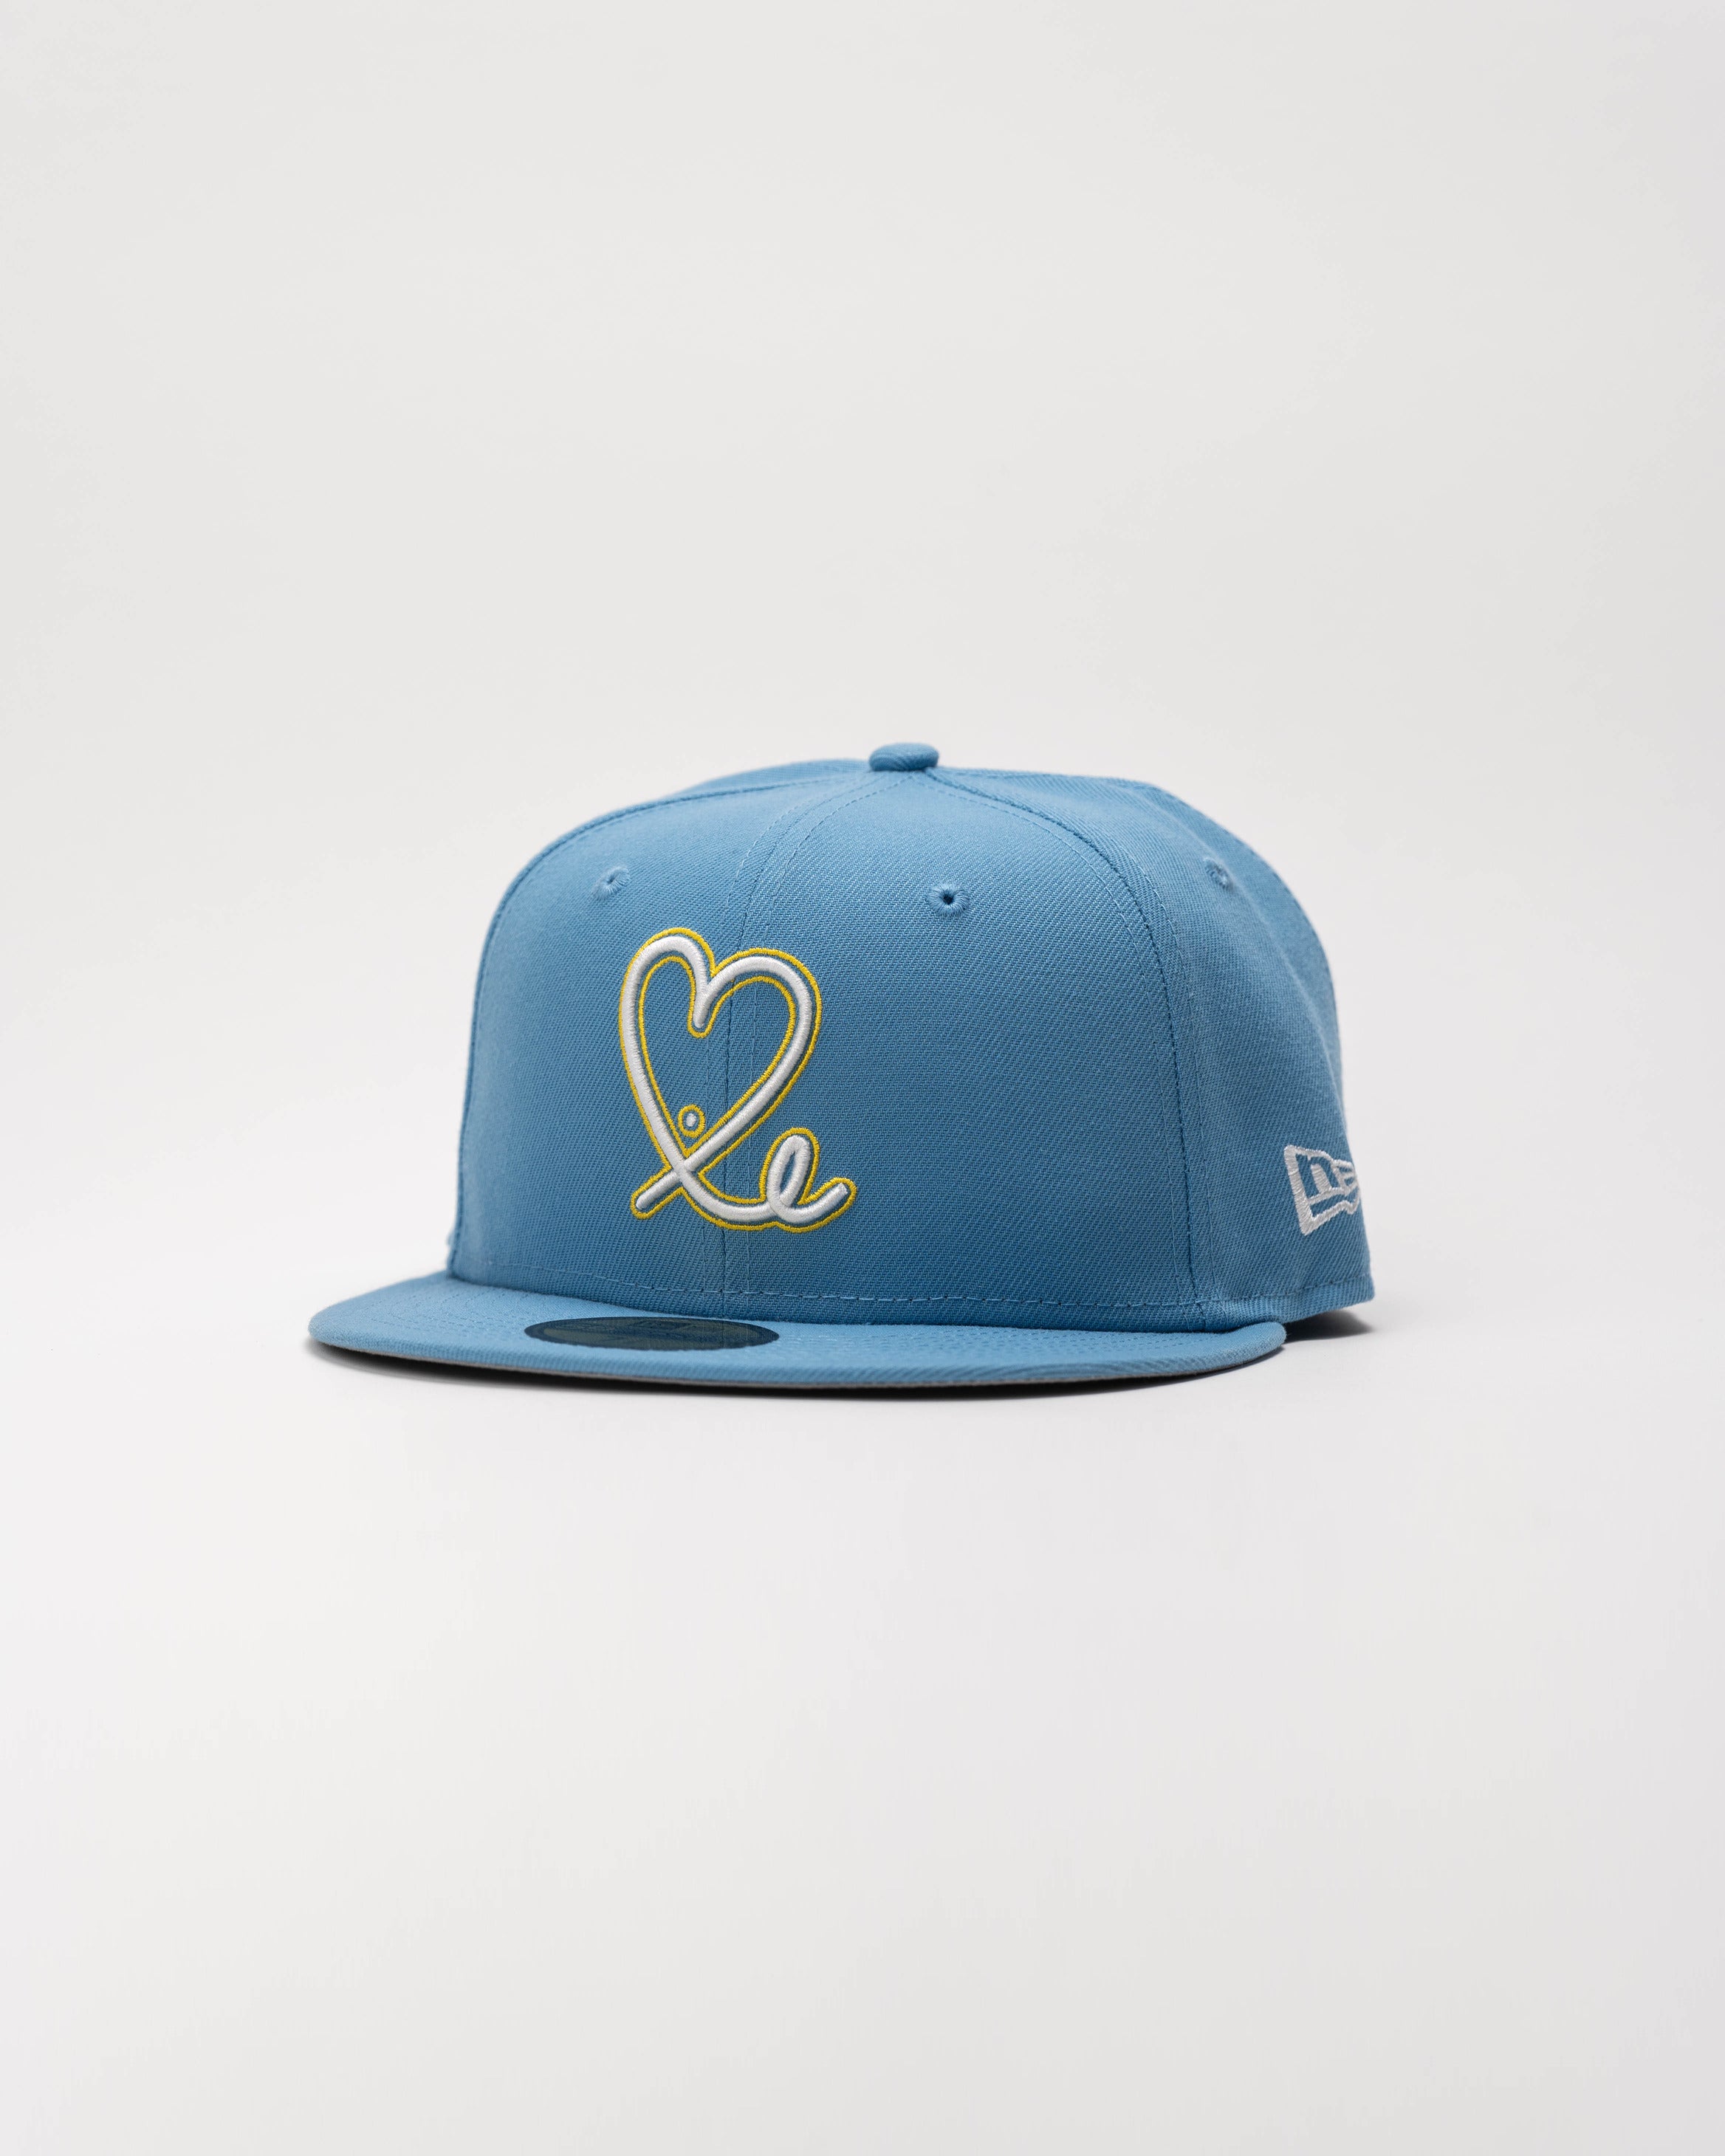 Limited Sky Blue / Navy 1LoveIE Raincross New Era 59FIFTY Fitted Cap